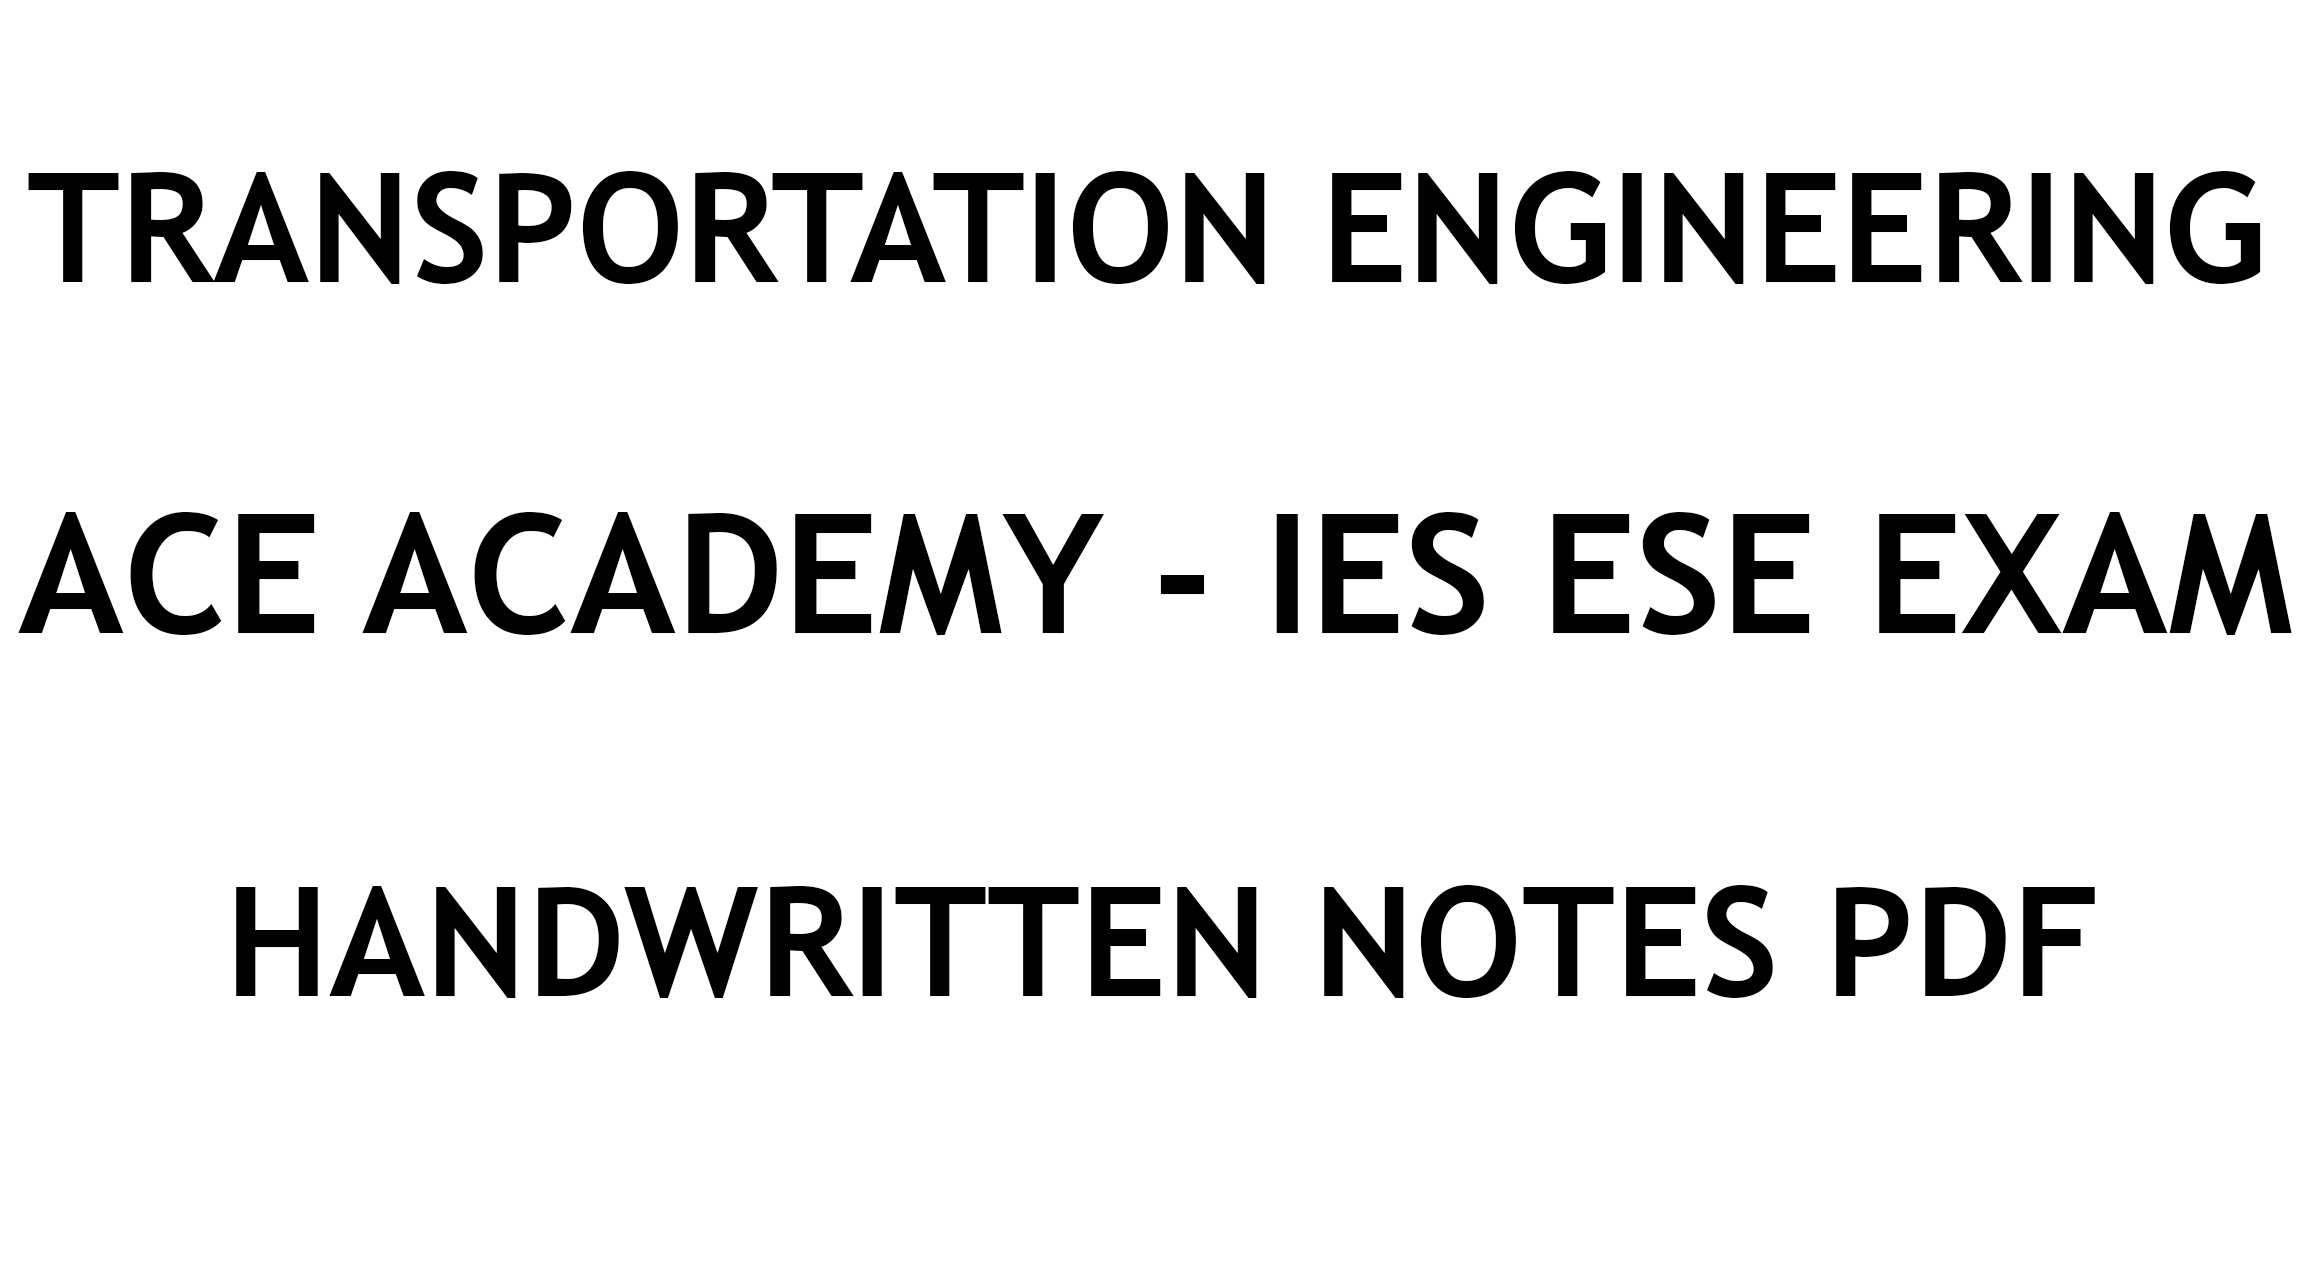 Transportation Engineering IES ESE Ace Academy Handwritten Notes